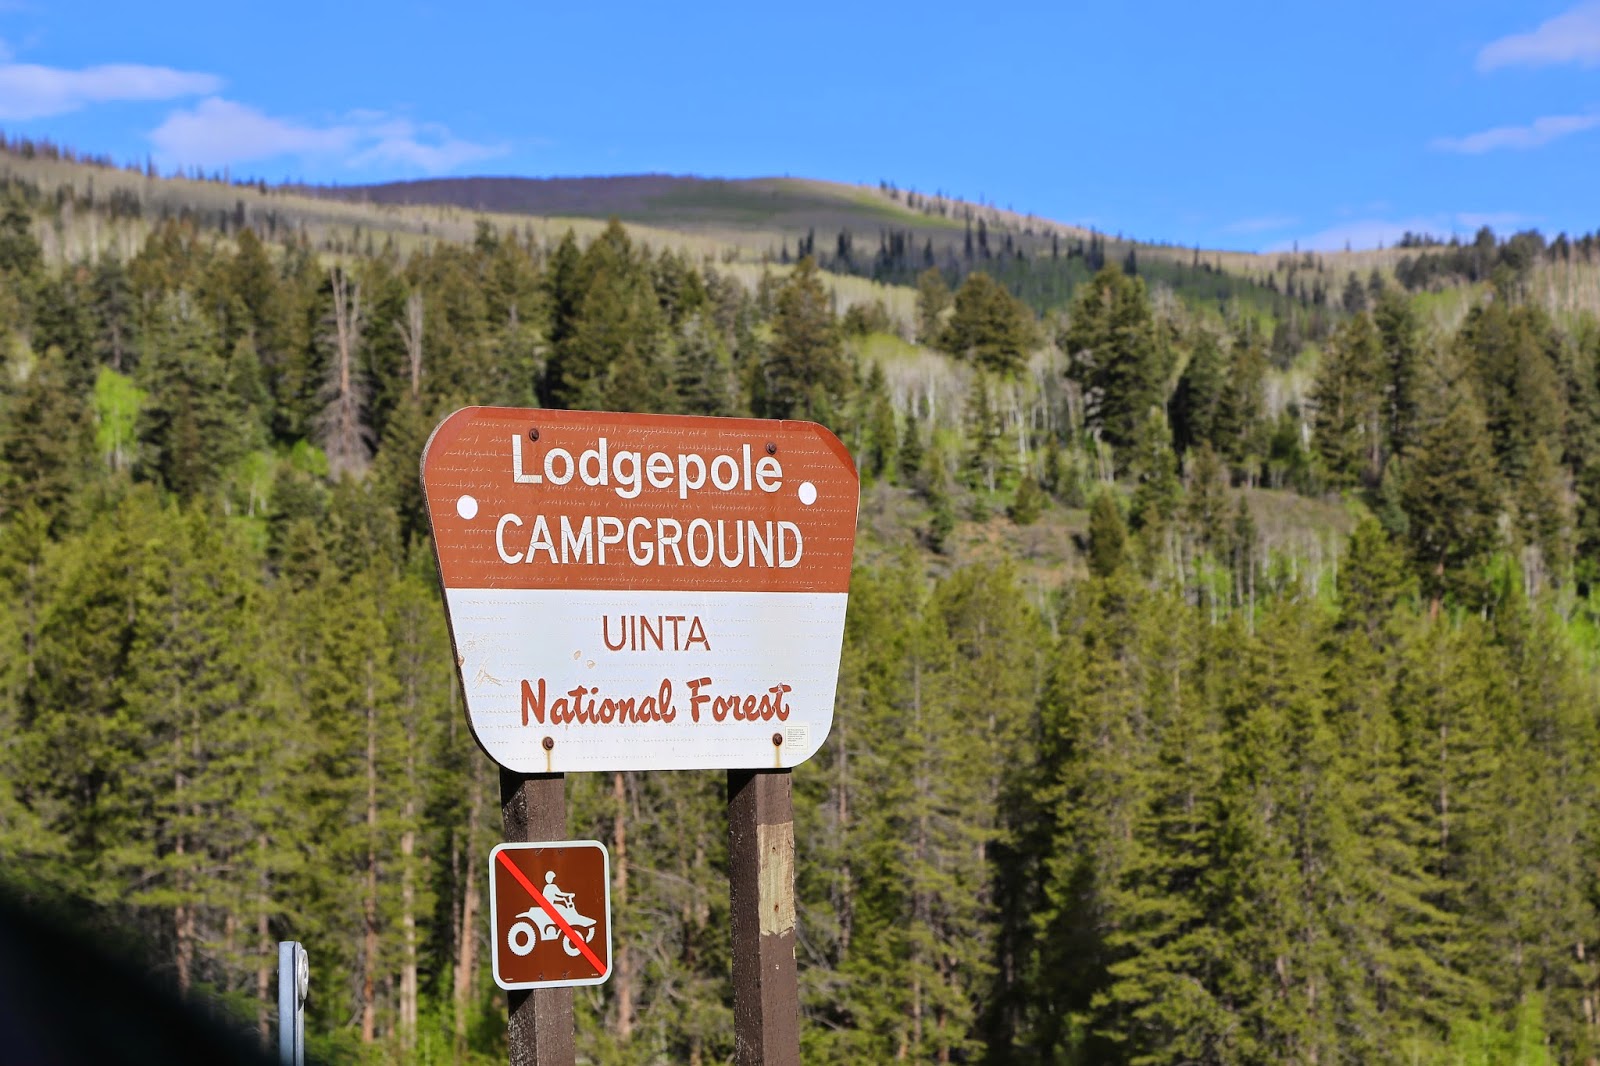 Camping at Lodgepole Campground | | Making Life Blissful